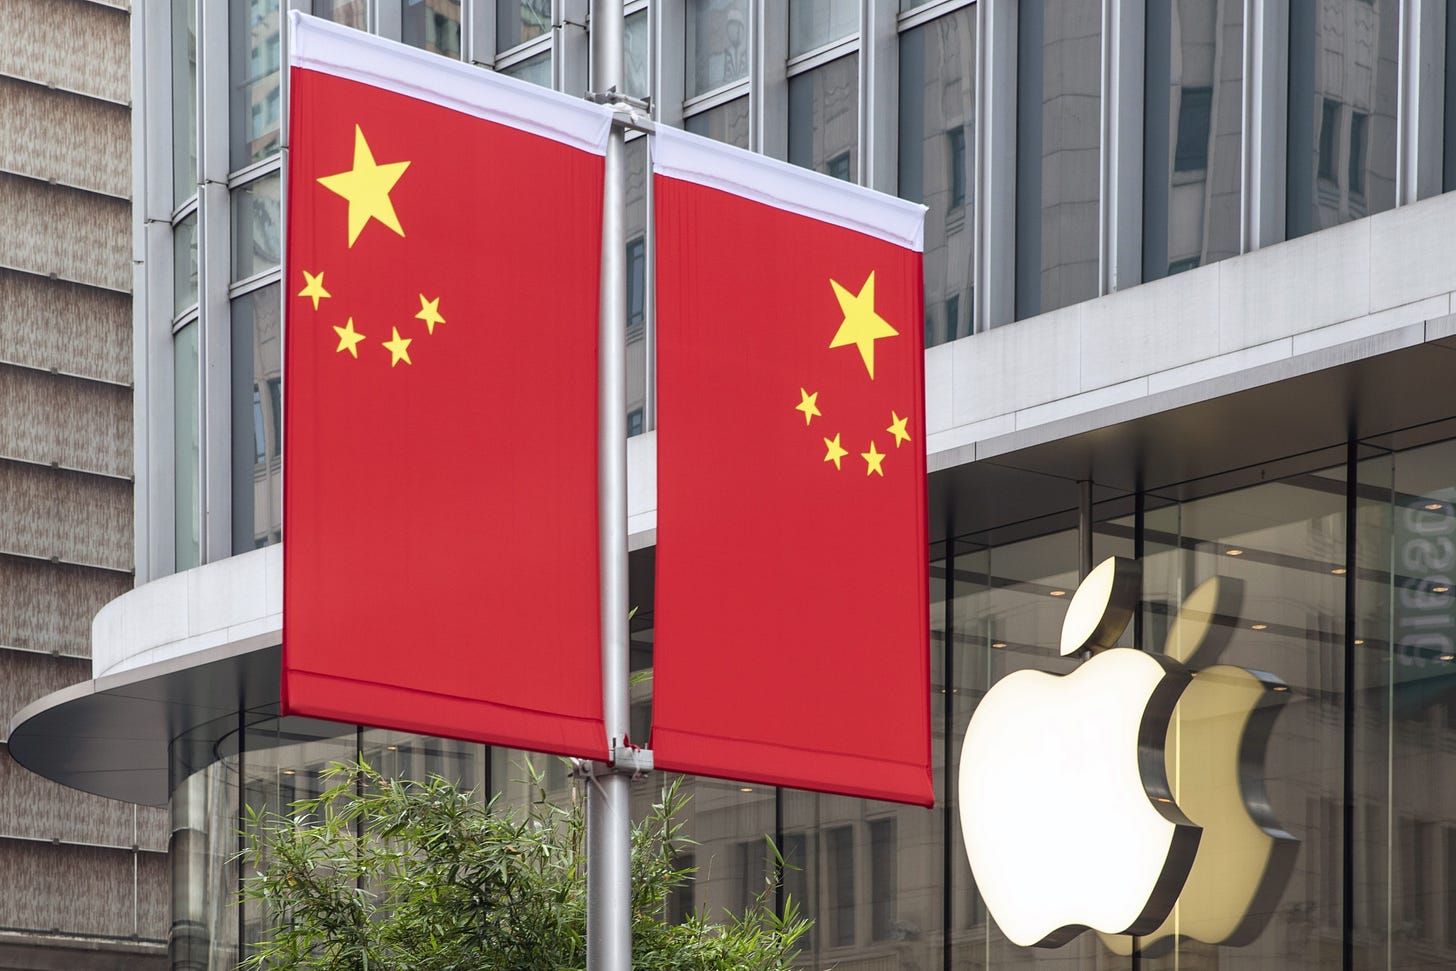 Will Apple (AAPL) Move More of Its Supply Chain Out of China? - Bloomberg